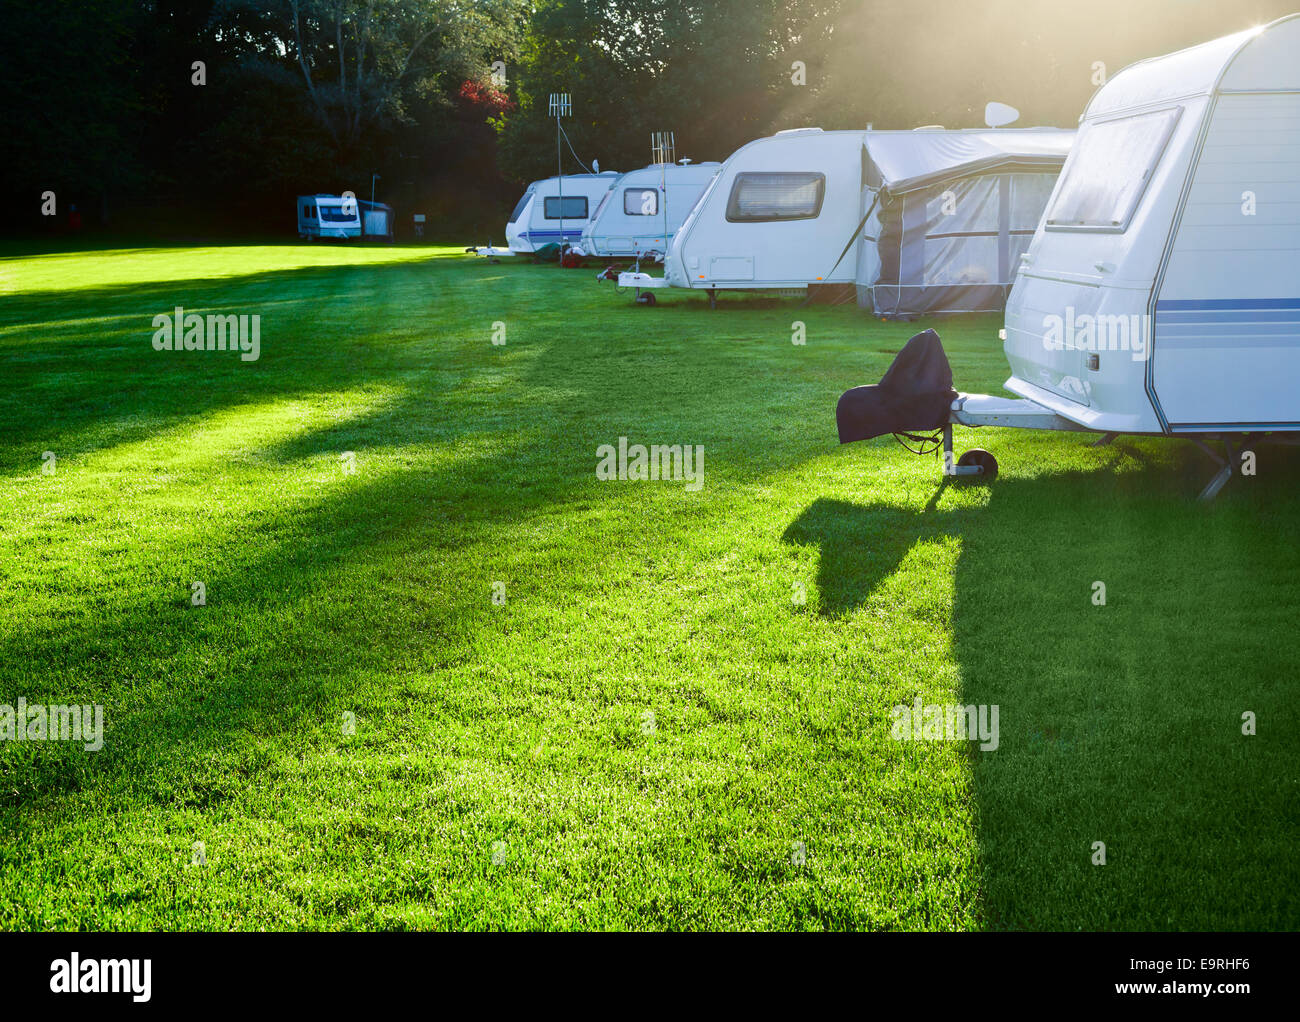 Campsite with caravans in a morning light Stock Photo